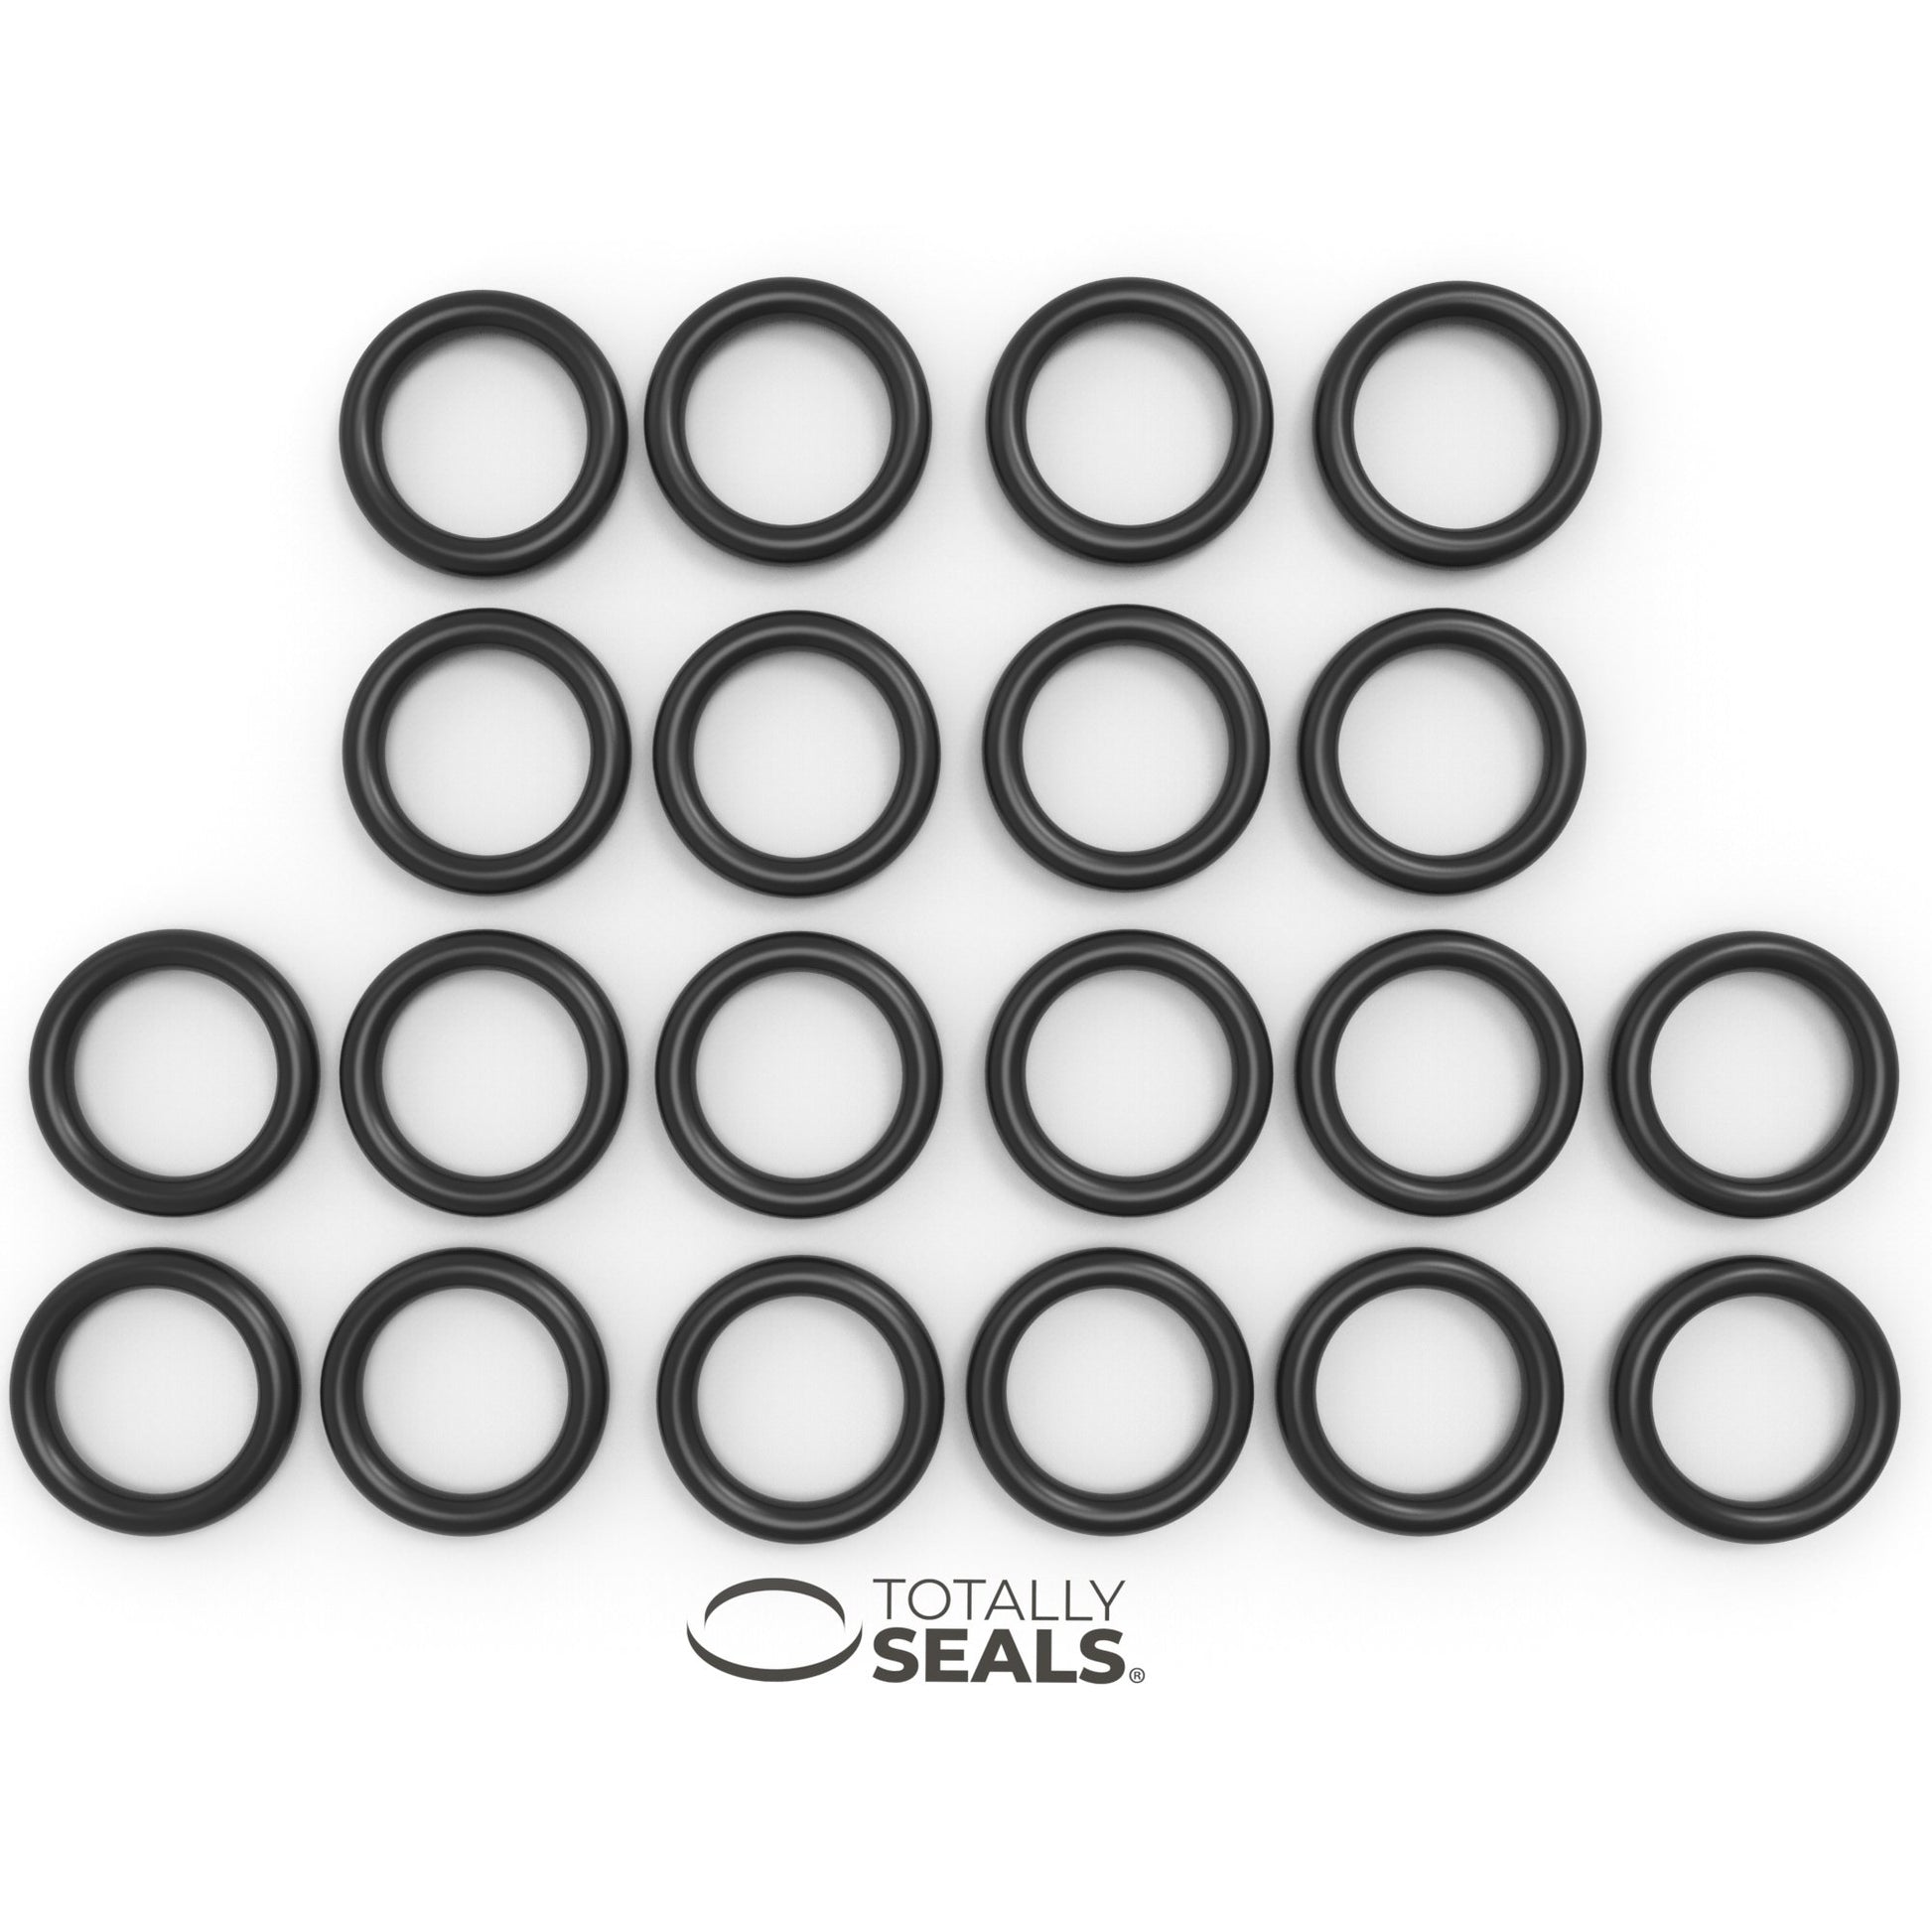 38mm x 3mm (44mm OD) Nitrile O-Rings - Totally Seals®